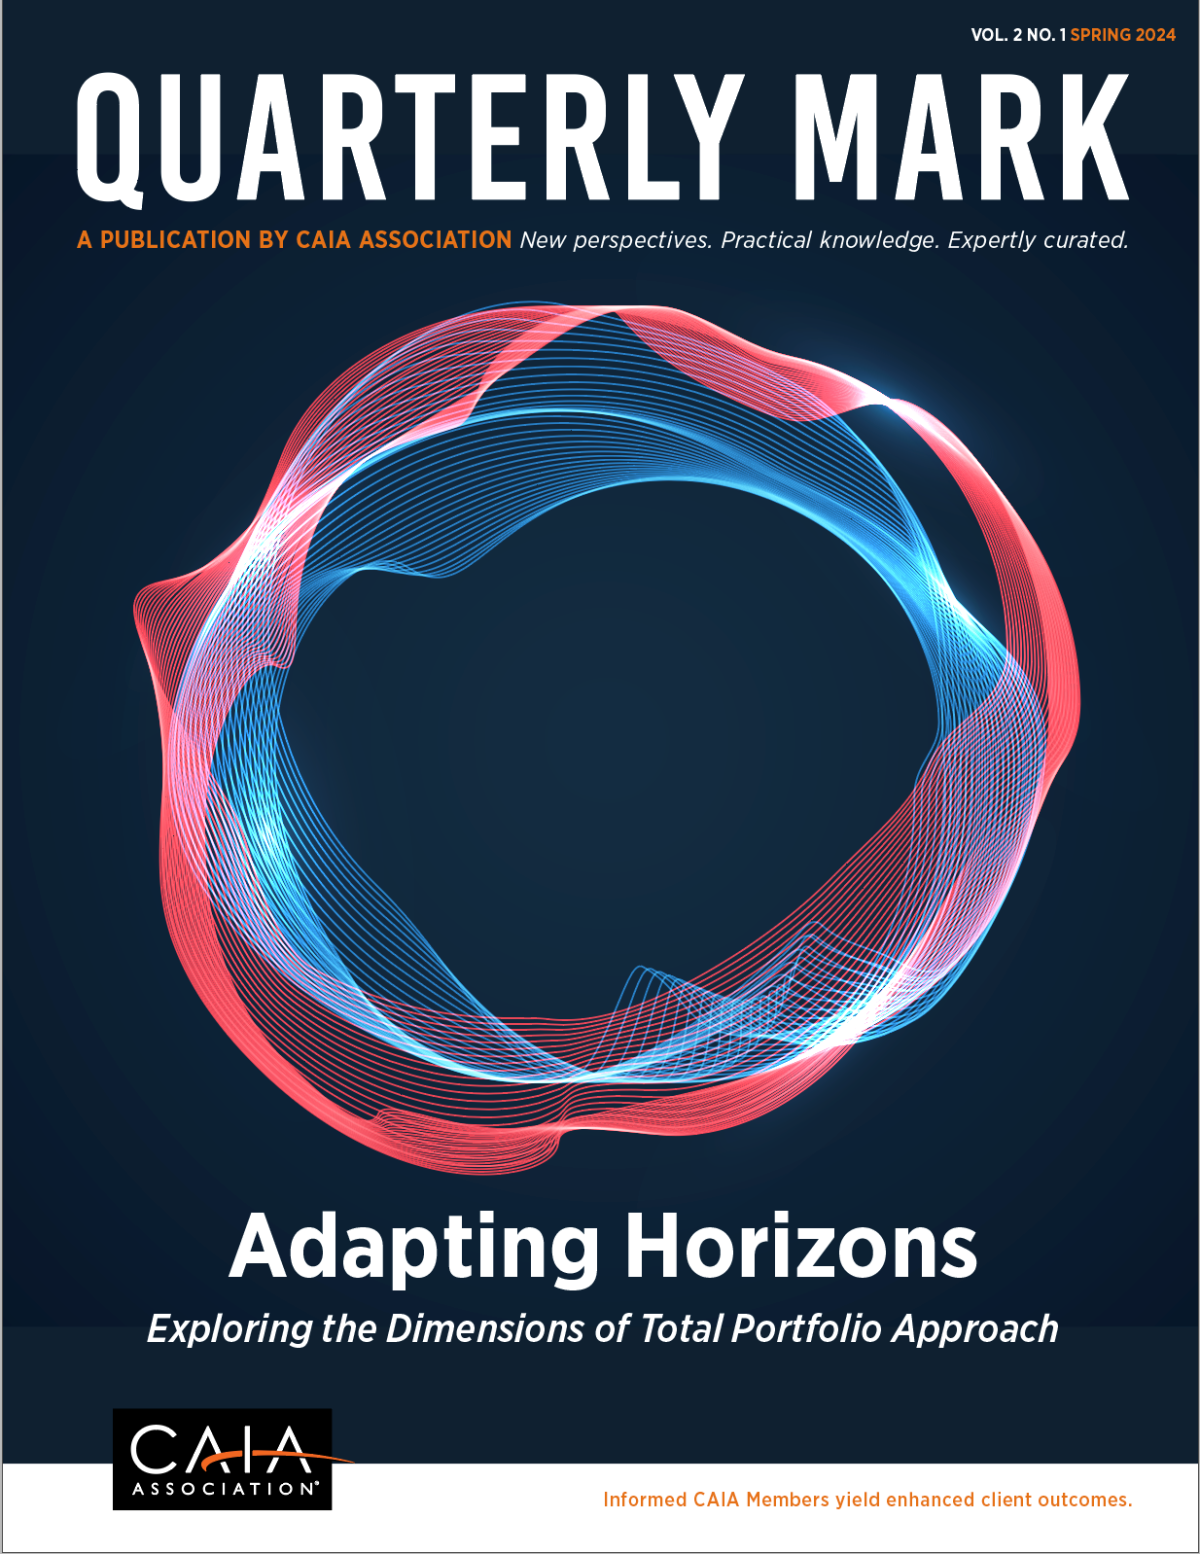 Adapting Horizons: Exploring the Dimensions of Total Portfolio Approach